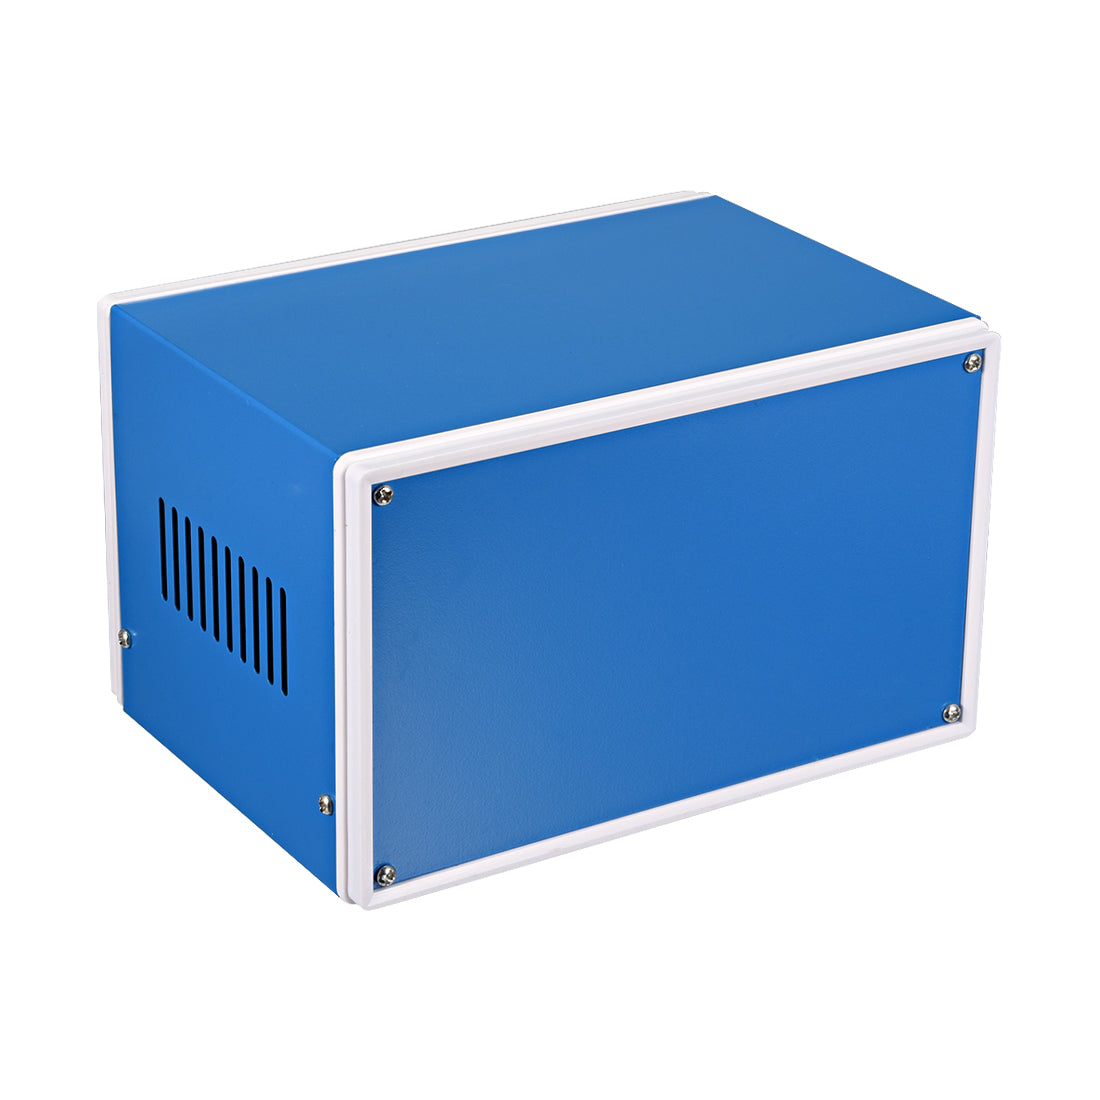 uxcell Uxcell Metal Blue Project Junction Box Enclosure Case 180 x 130 x 110mm/7.09 x 5.12 x 4.33inch